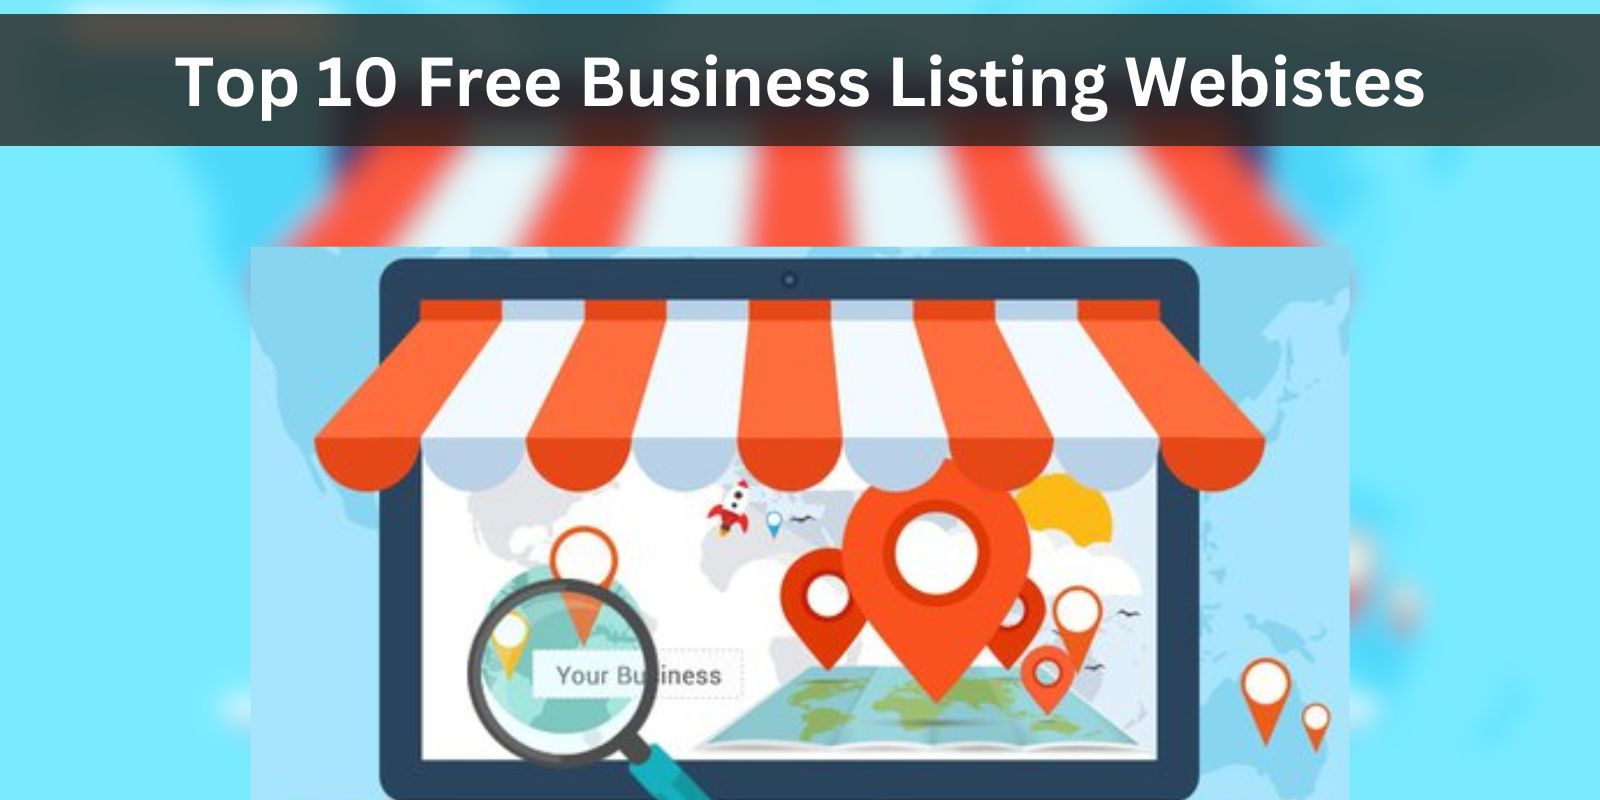 Top 10 Free Business Listing Webistes